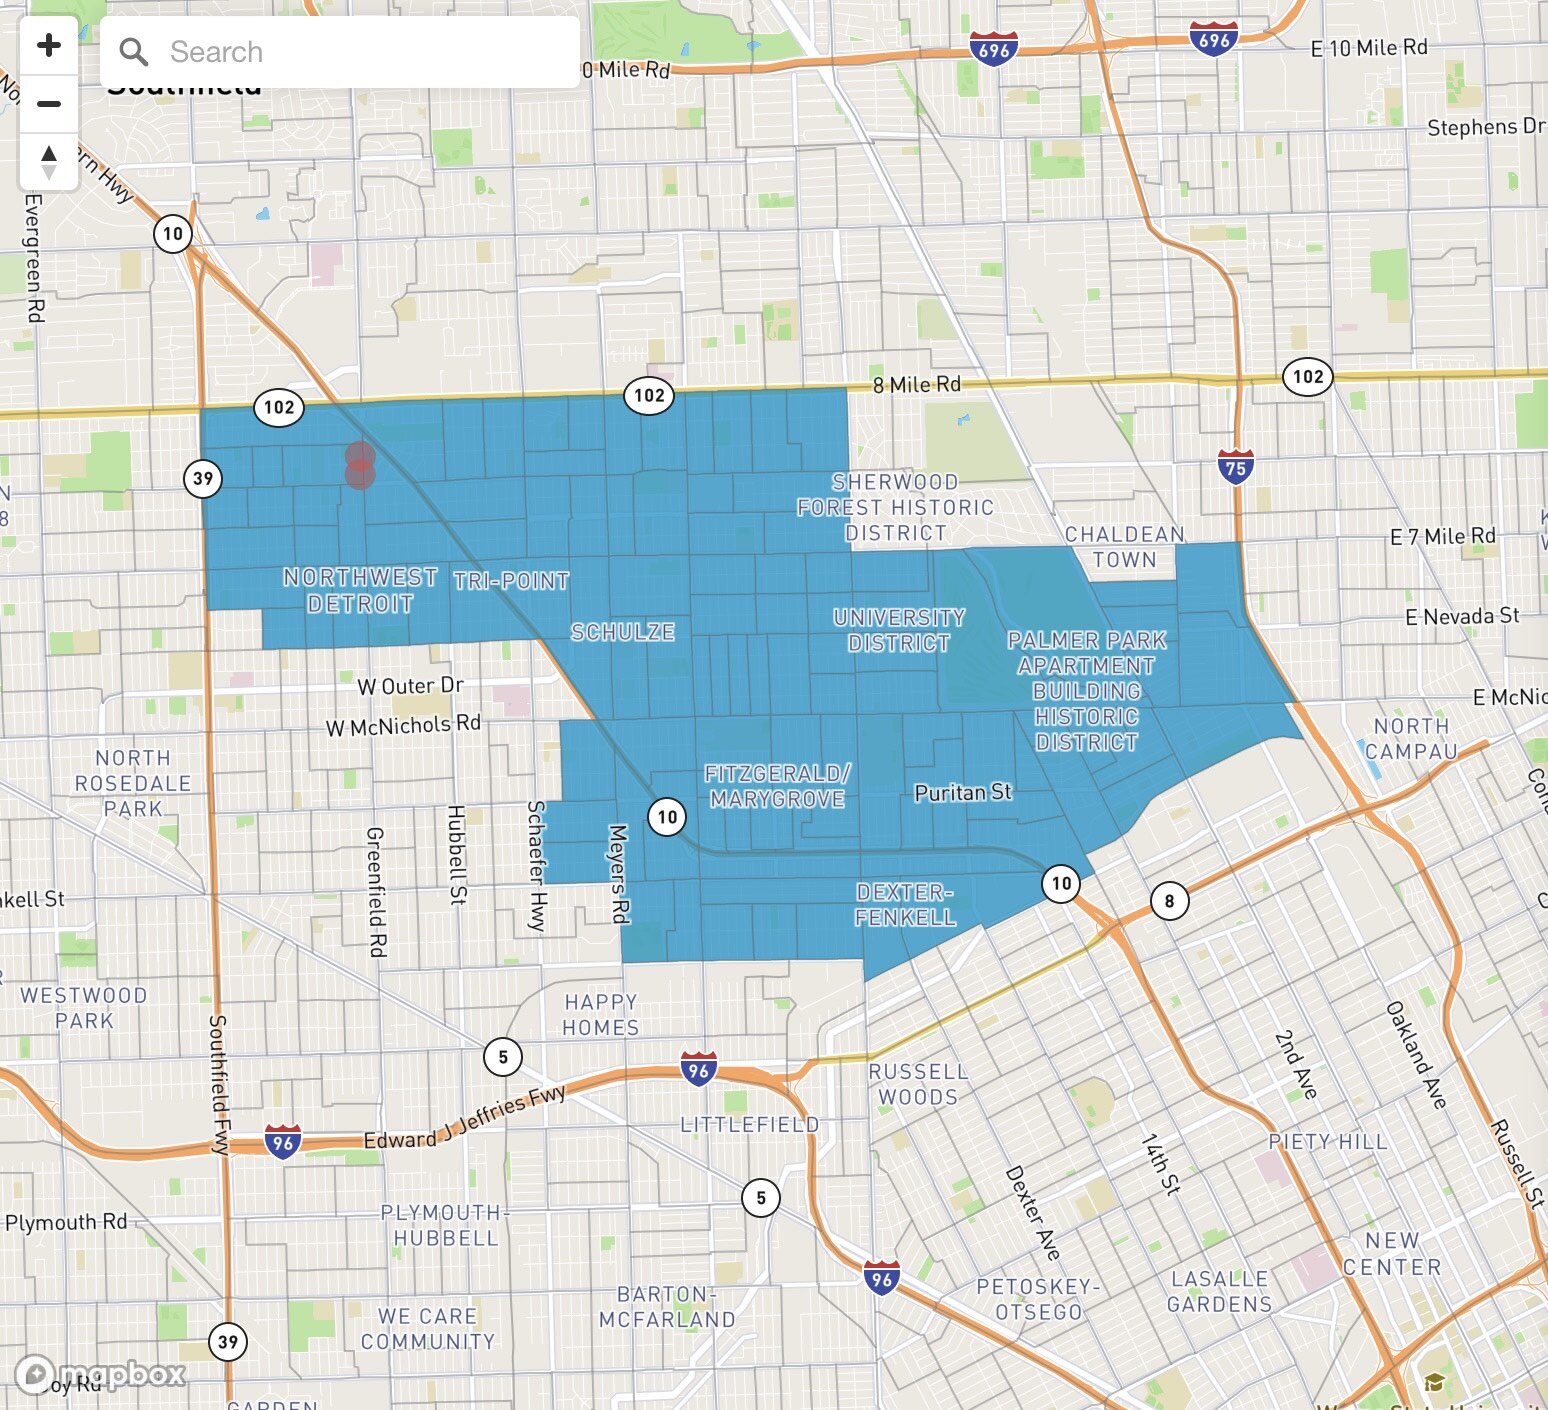 This map was submitted by LGBT Detroit in their efforts to have Palmer Park represented within one voting district